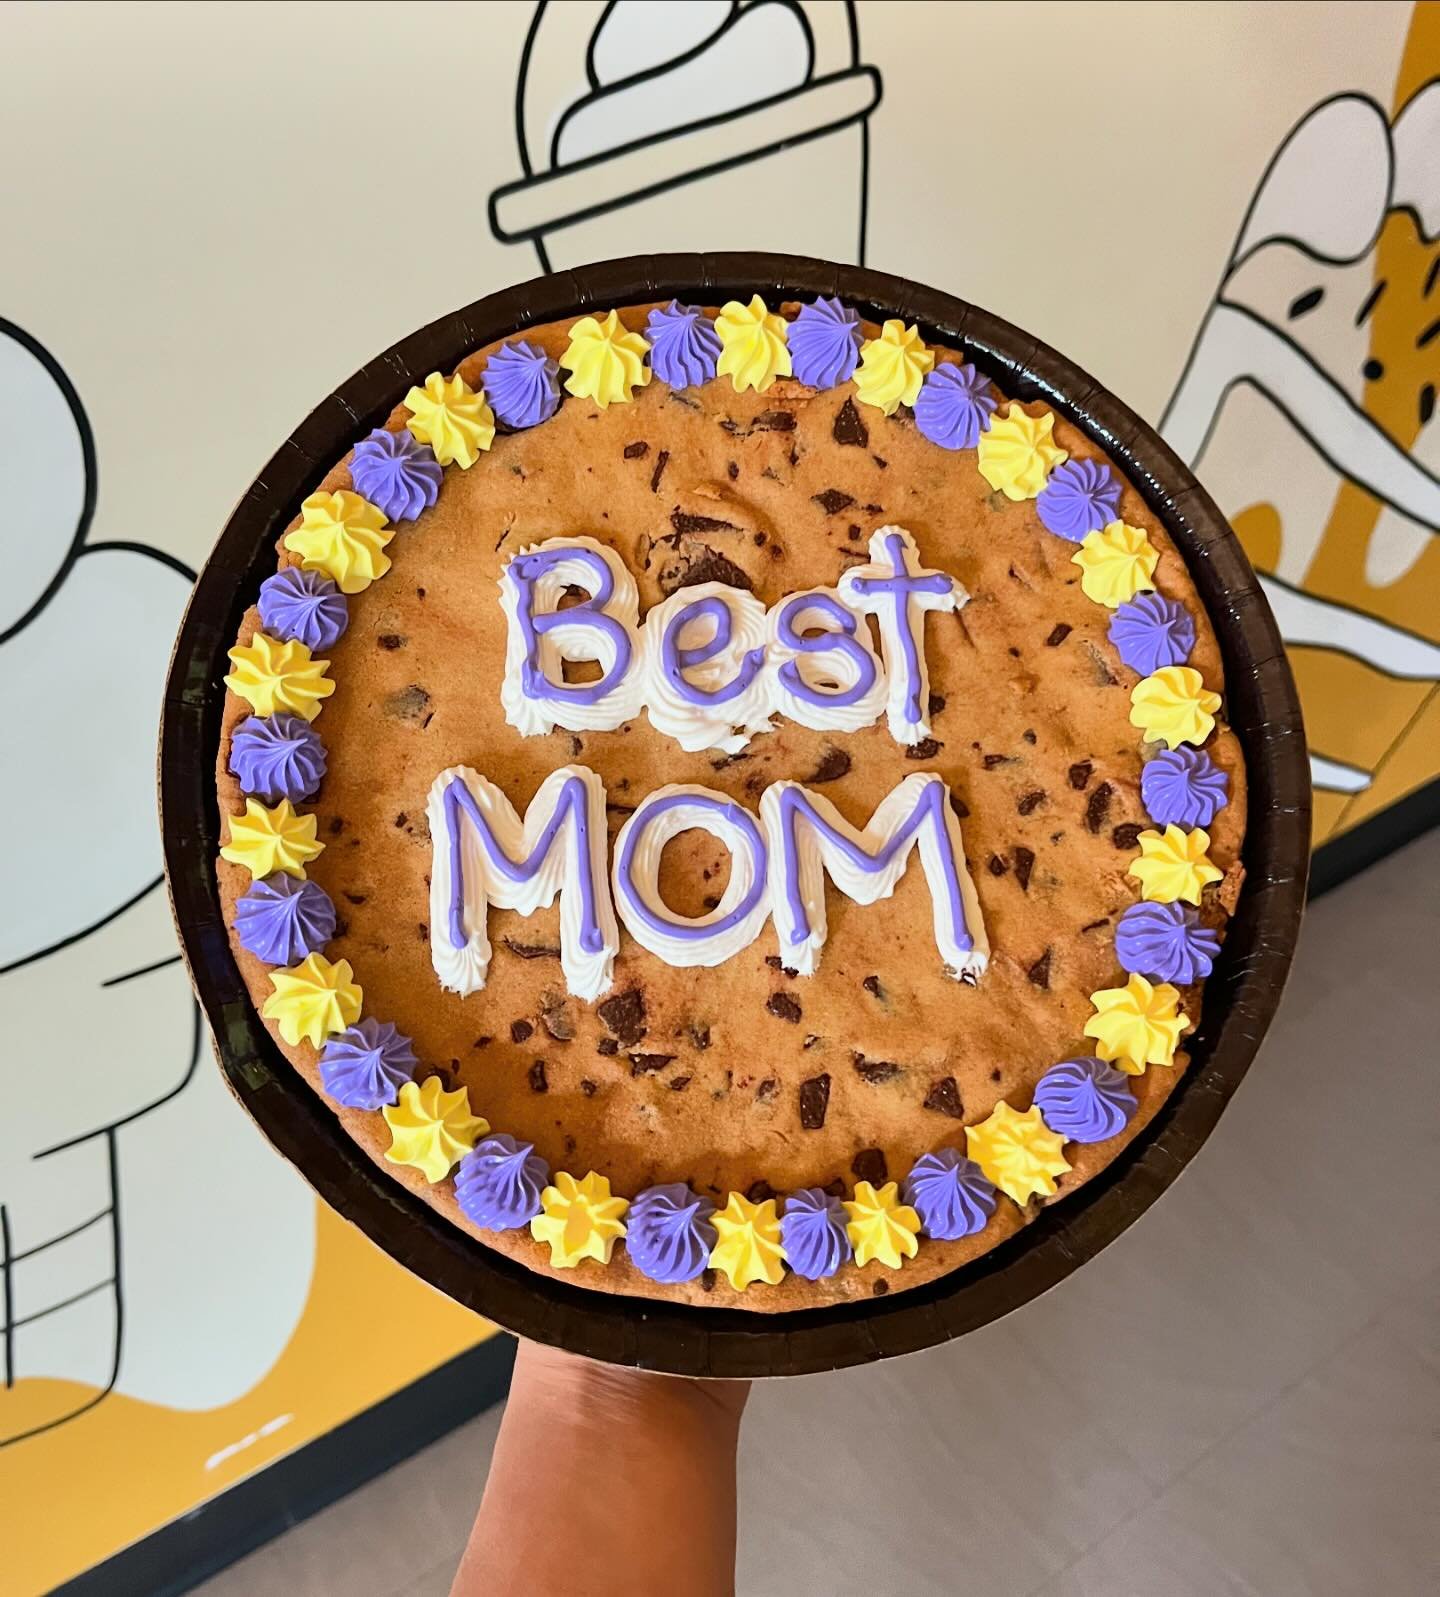 COOKIE CAKE! Grab a cookie cake for Mother&rsquo;s Day! Mom will be sure to love this 9&rdquo; soft, chewy chocolate chip cookie decorated with vanilla icing. (Limited time only. Sorry, no custom orders.)
⠀⠀⠀⠀⠀⠀⠀⠀⠀⠀⠀⠀⠀⠀⠀⠀⠀⠀
Come on by!
🌷Sun: Noon-9p